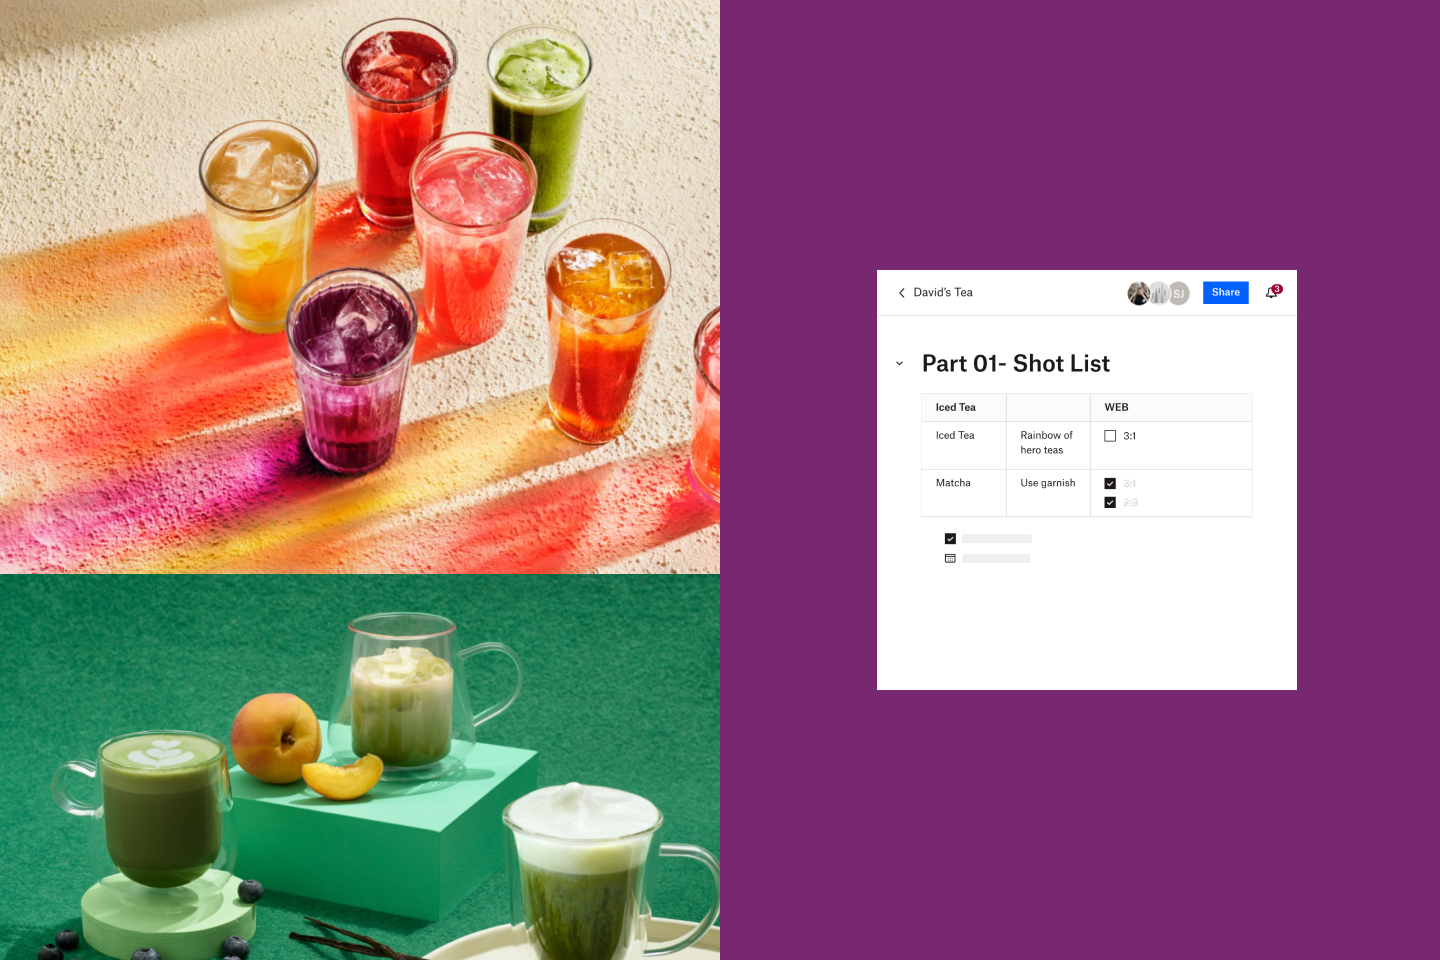 Iced tea in warm colors; Matcha mugs with peach, blueberries, and vanilla on green background; Document with the shot list